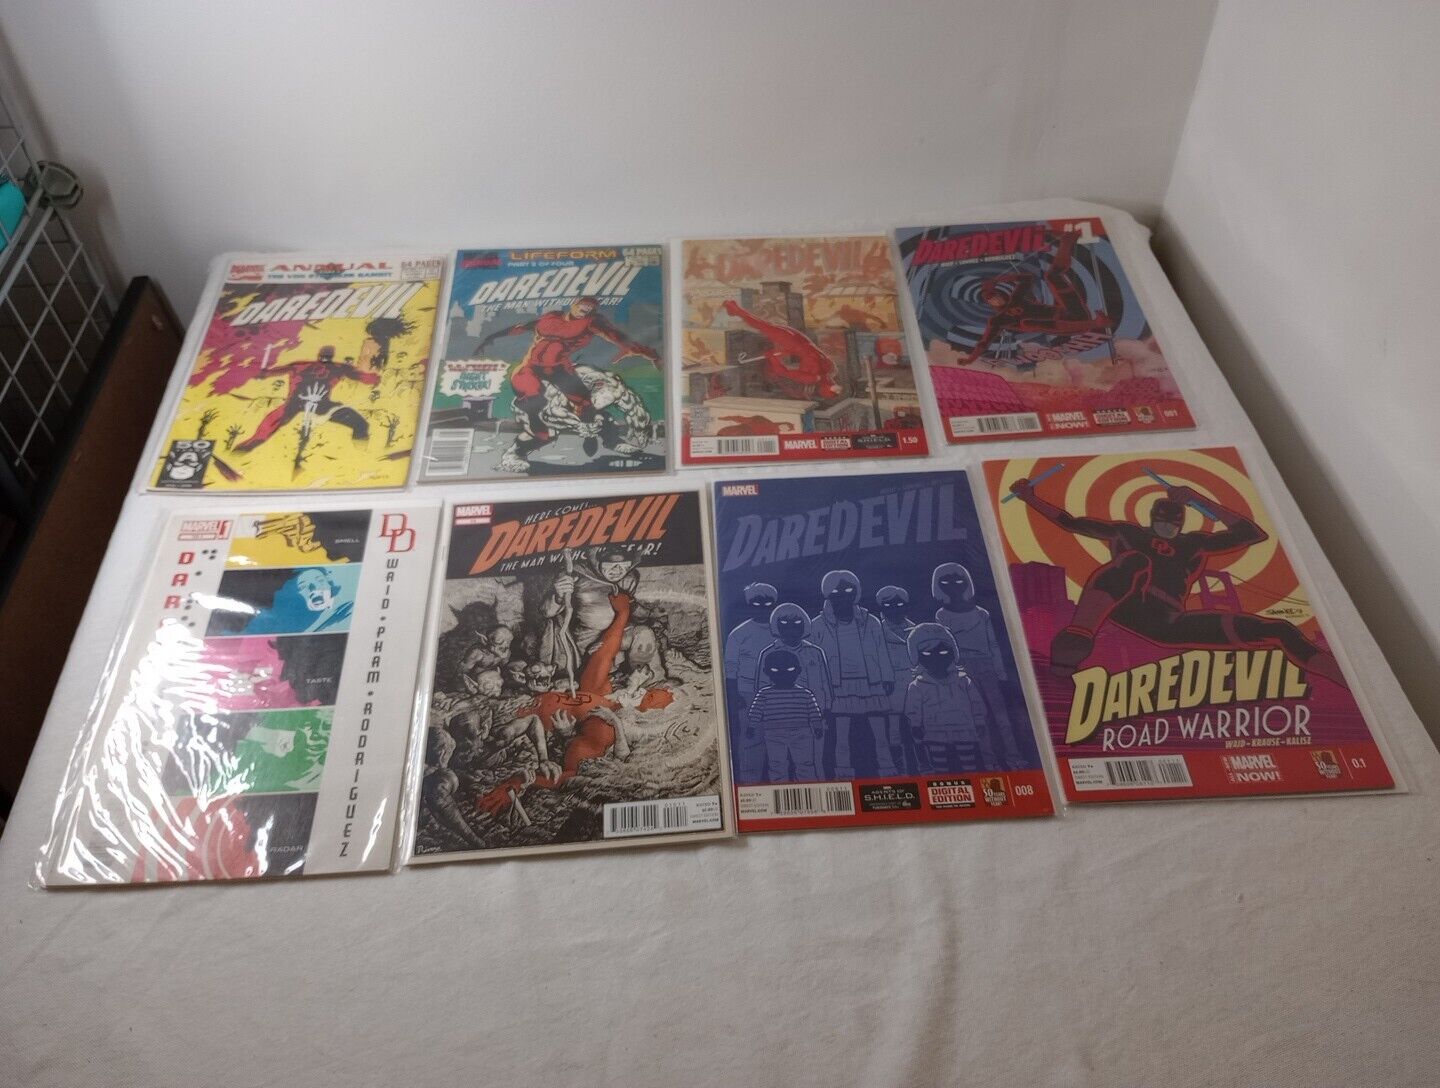 Mixed Lot of 8 Daredevil Comic Books Various Issues Marvel Super Heros Graphic